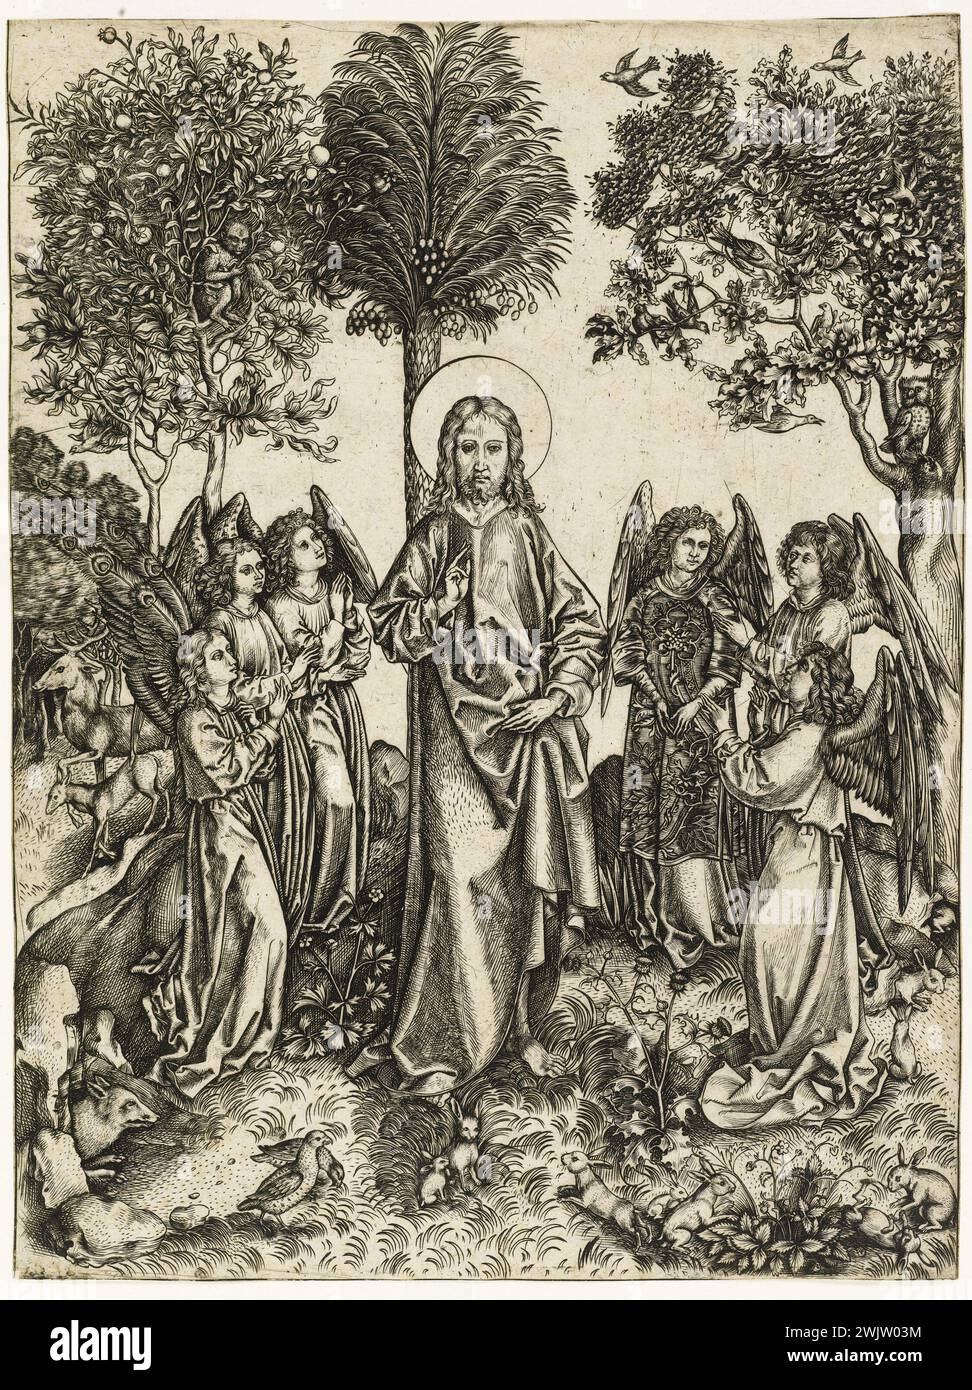 Master i.e .. Christ in the desert served by the angels (BARTSCH Suppl. 6). Engraving (chisel), 1480-1490. Museum of Fine Arts of the City of Paris, Petit Palais. 76856-12 Art medieval, Christianity, engraving in chisel, Christian iconography, religious iconography, Middle Ages, New Testament, biblical character, 15th XV 15th 15th 15th century, engraving Stock Photo